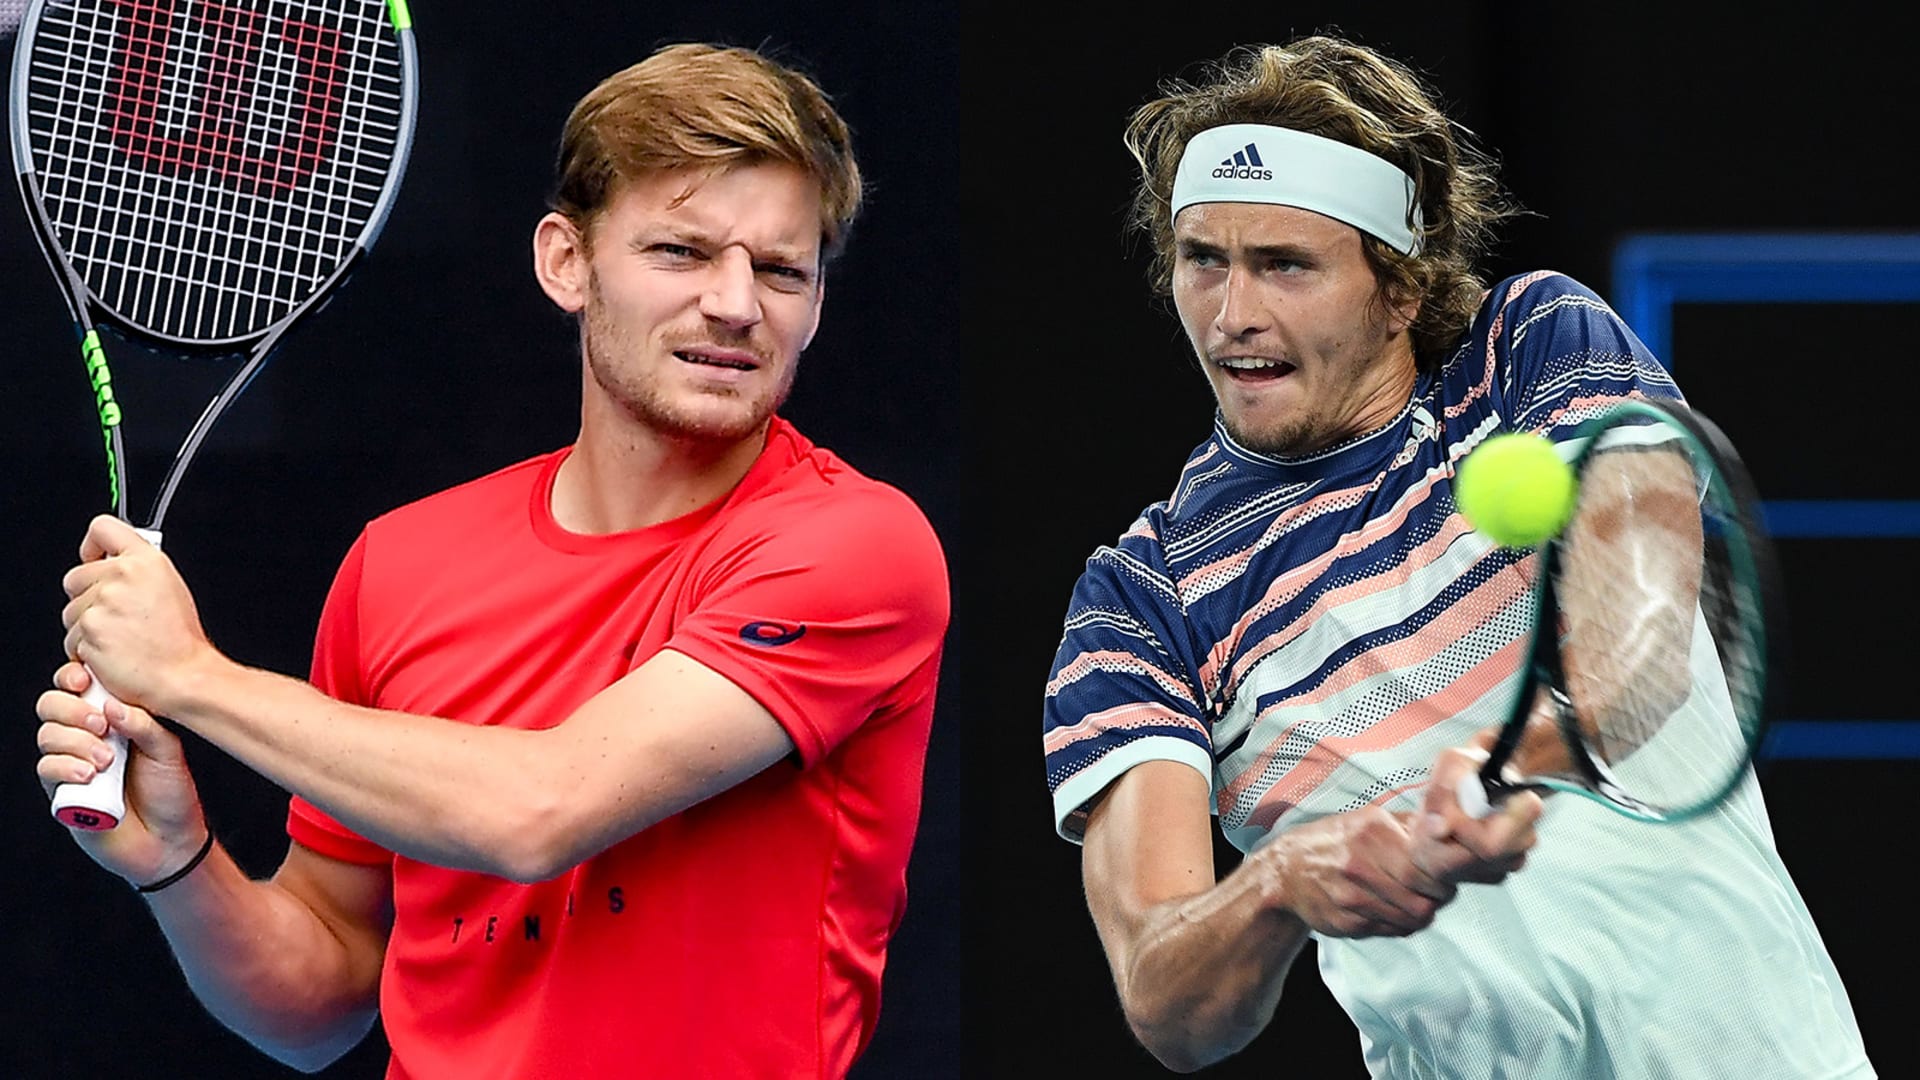 Madrid Open Virtual Pro Replays Goffin, Zverev reach knockout stage